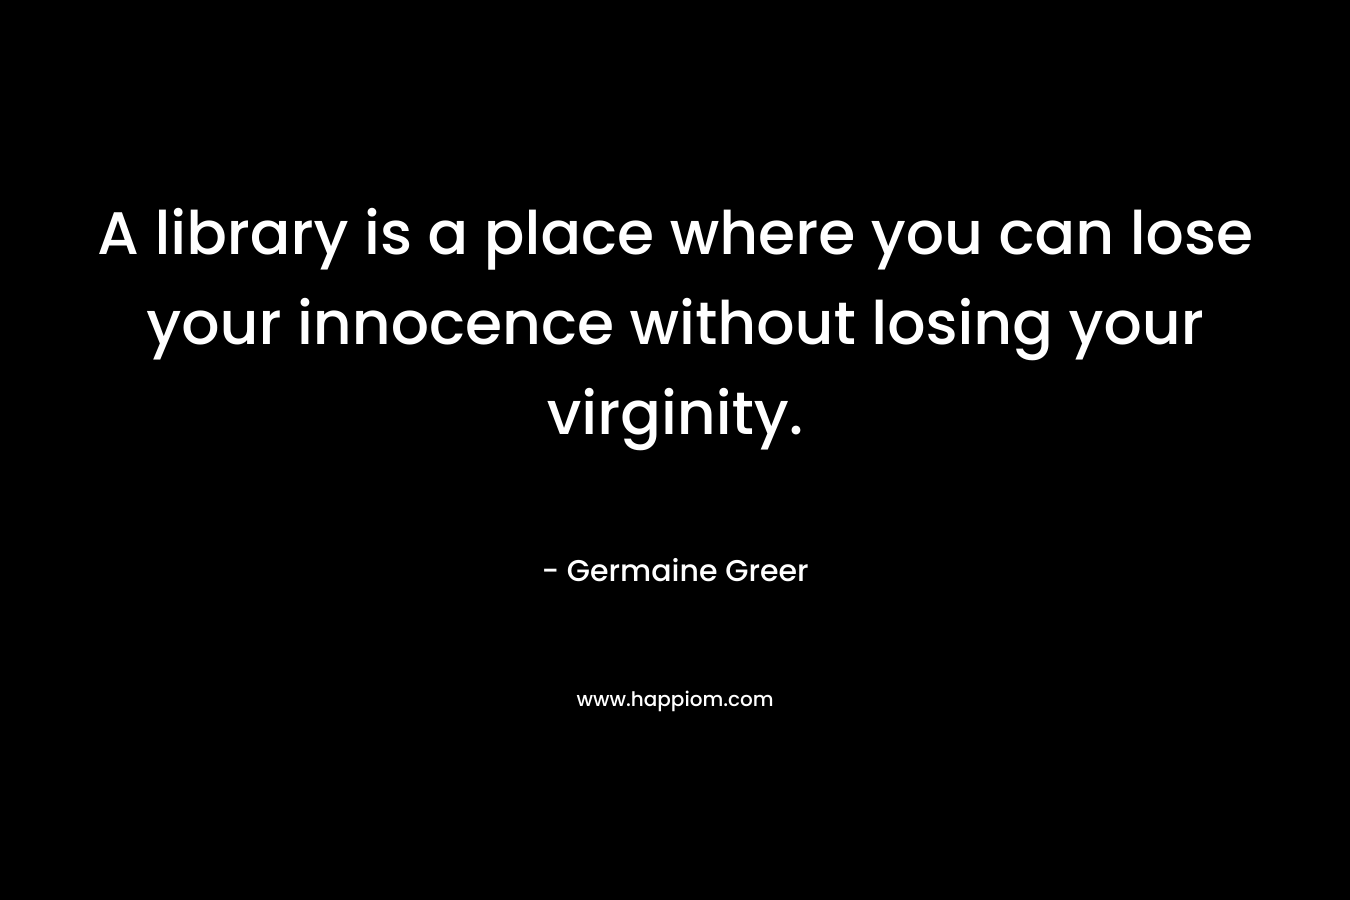 A library is a place where you can lose your innocence without losing your virginity. – Germaine Greer